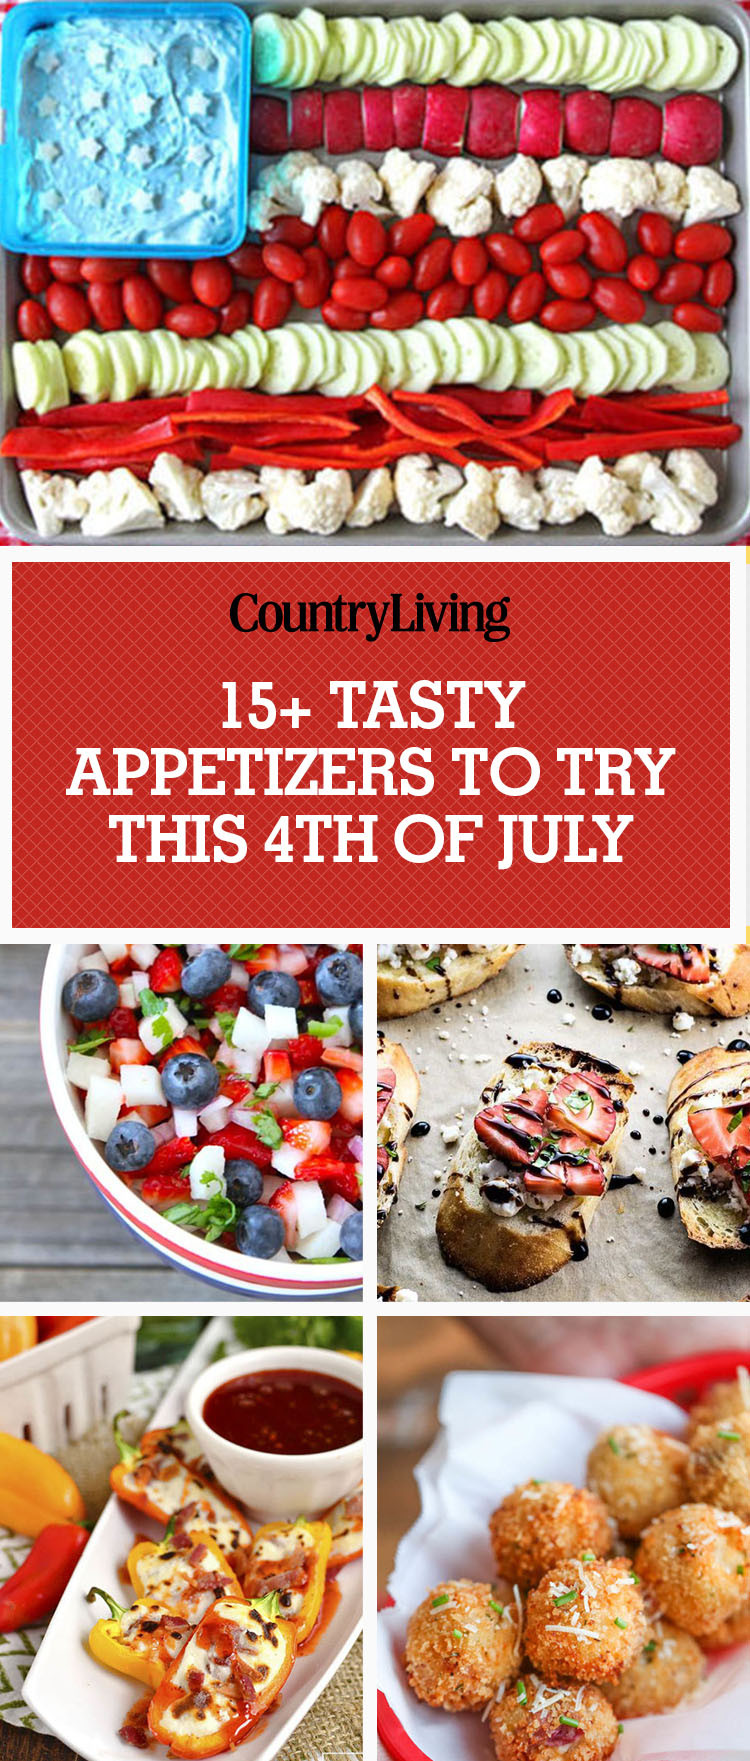 4Th Of July Appetizers
 17 Easy 4th of July Appetizers Best Recipes for Fourth